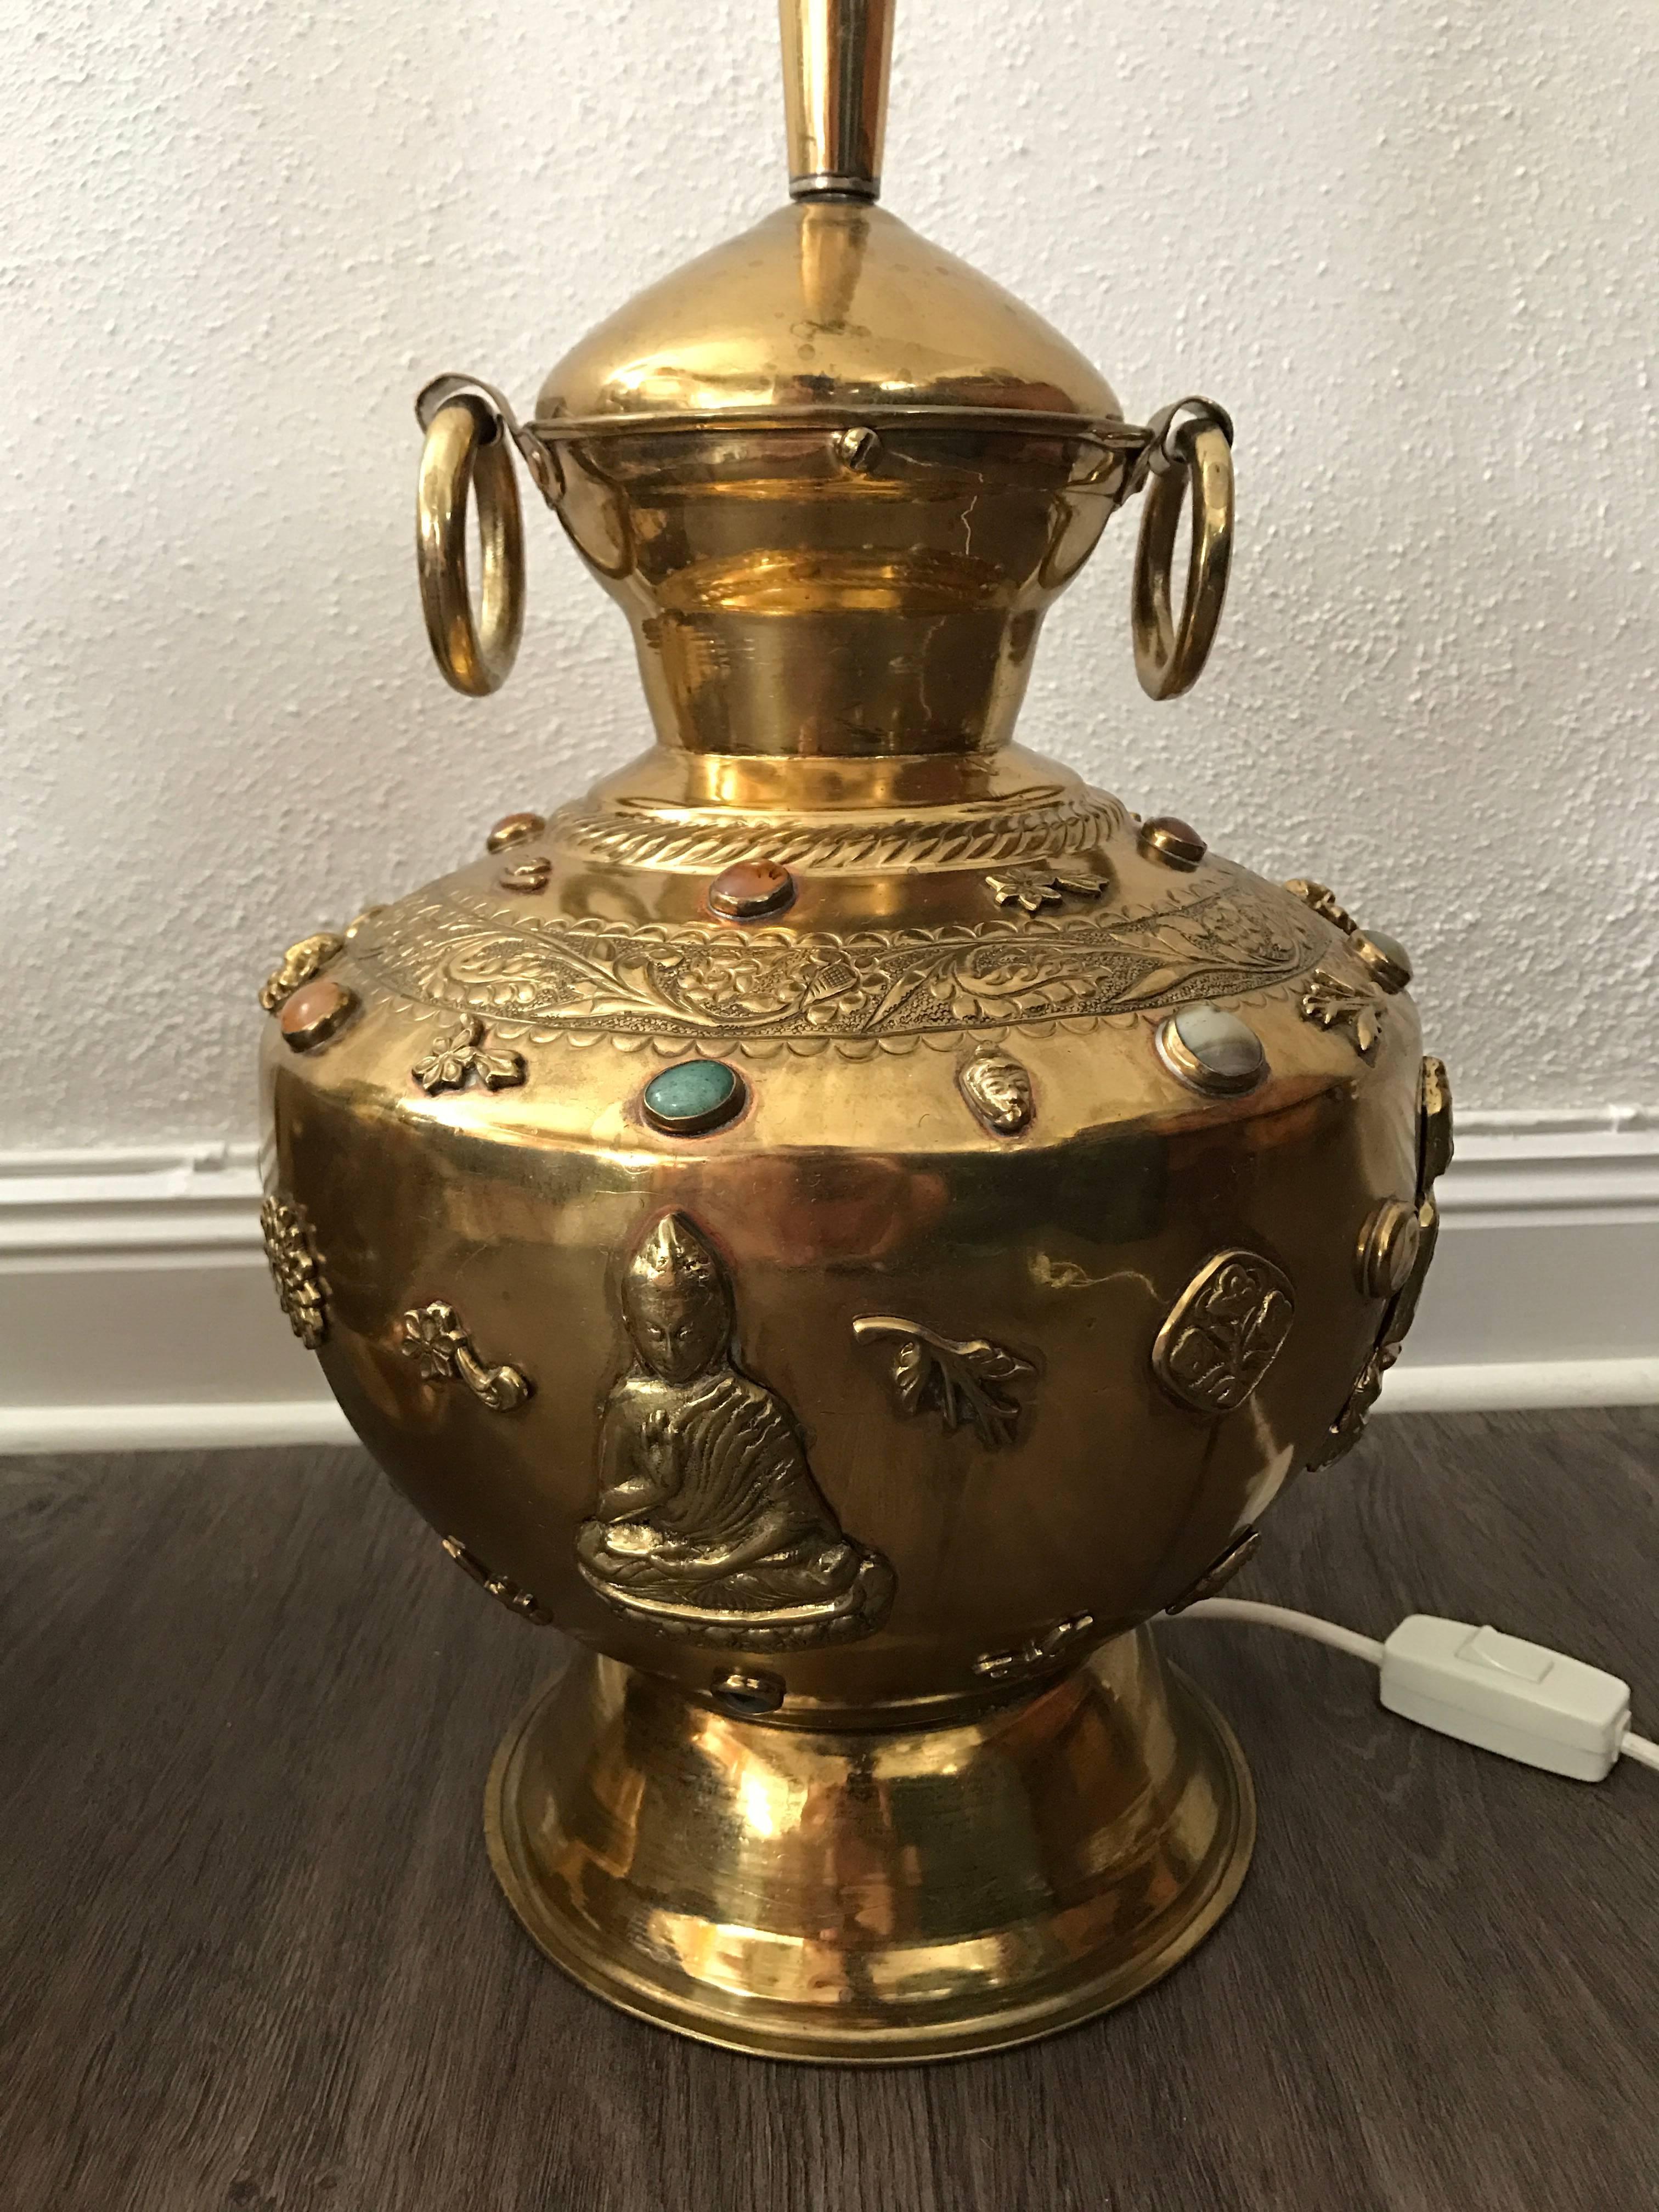 20th century pair of large Asian Buddha brass precious stones decorated table lamps a fantastic pair of beautifully decorated brass table lamps. There are precious stones, Buddha figures, chrysanthemum flowers, leaf and signs decorated all-over the